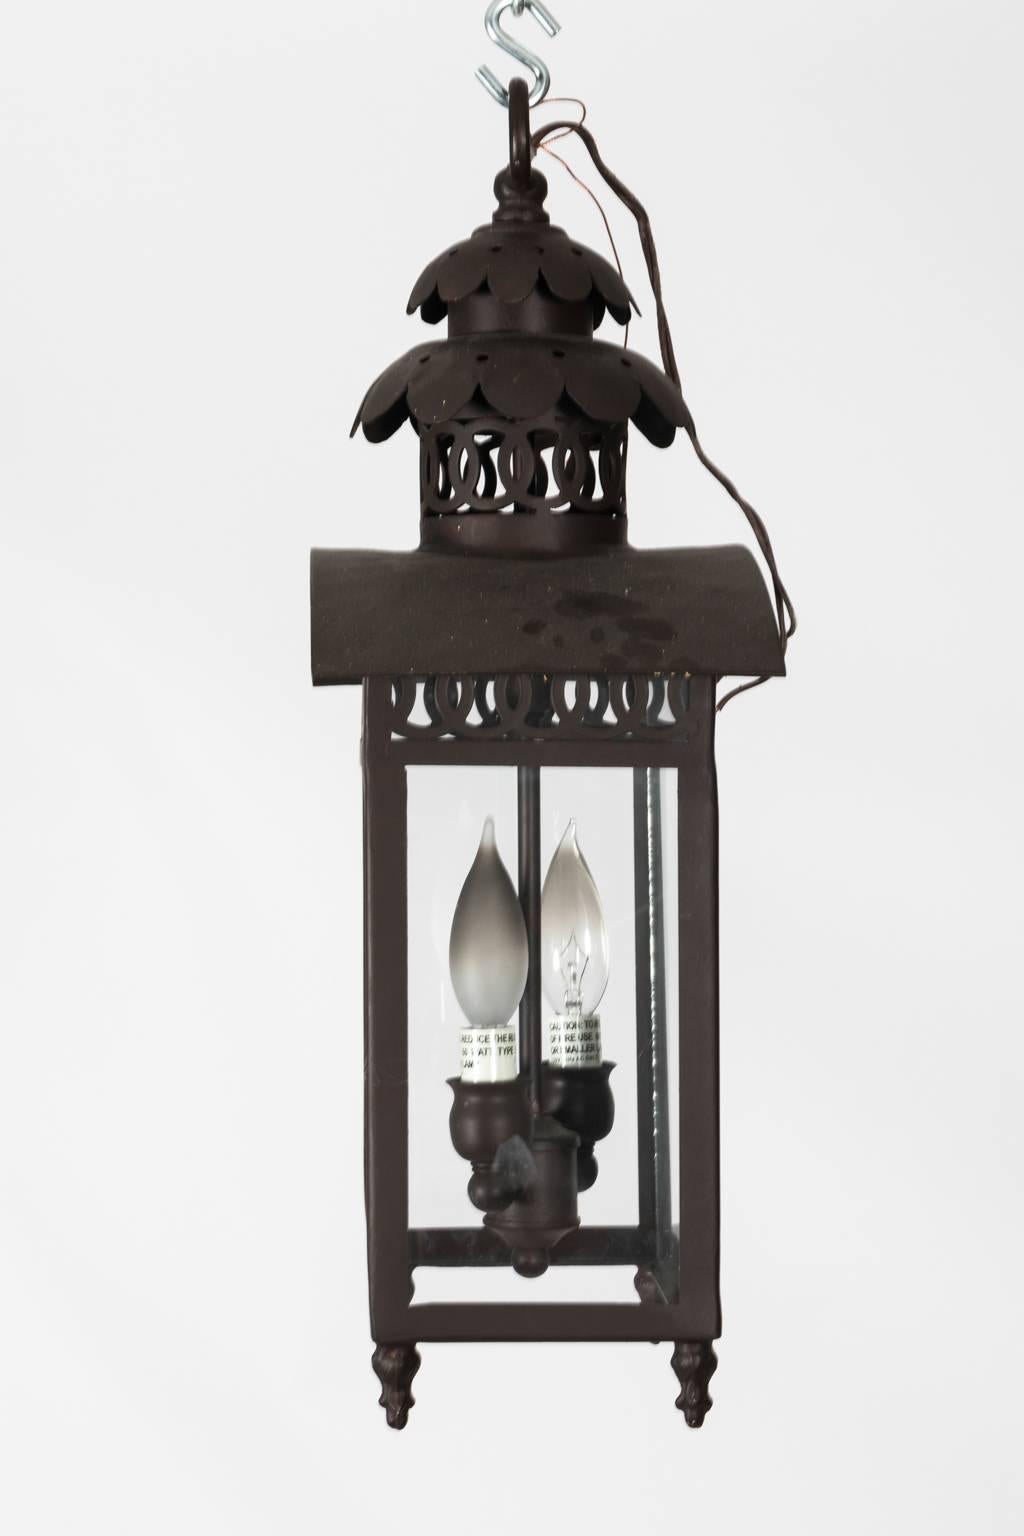 Contemporary black ironware exterior lantern with two lights and disk tracery.
   